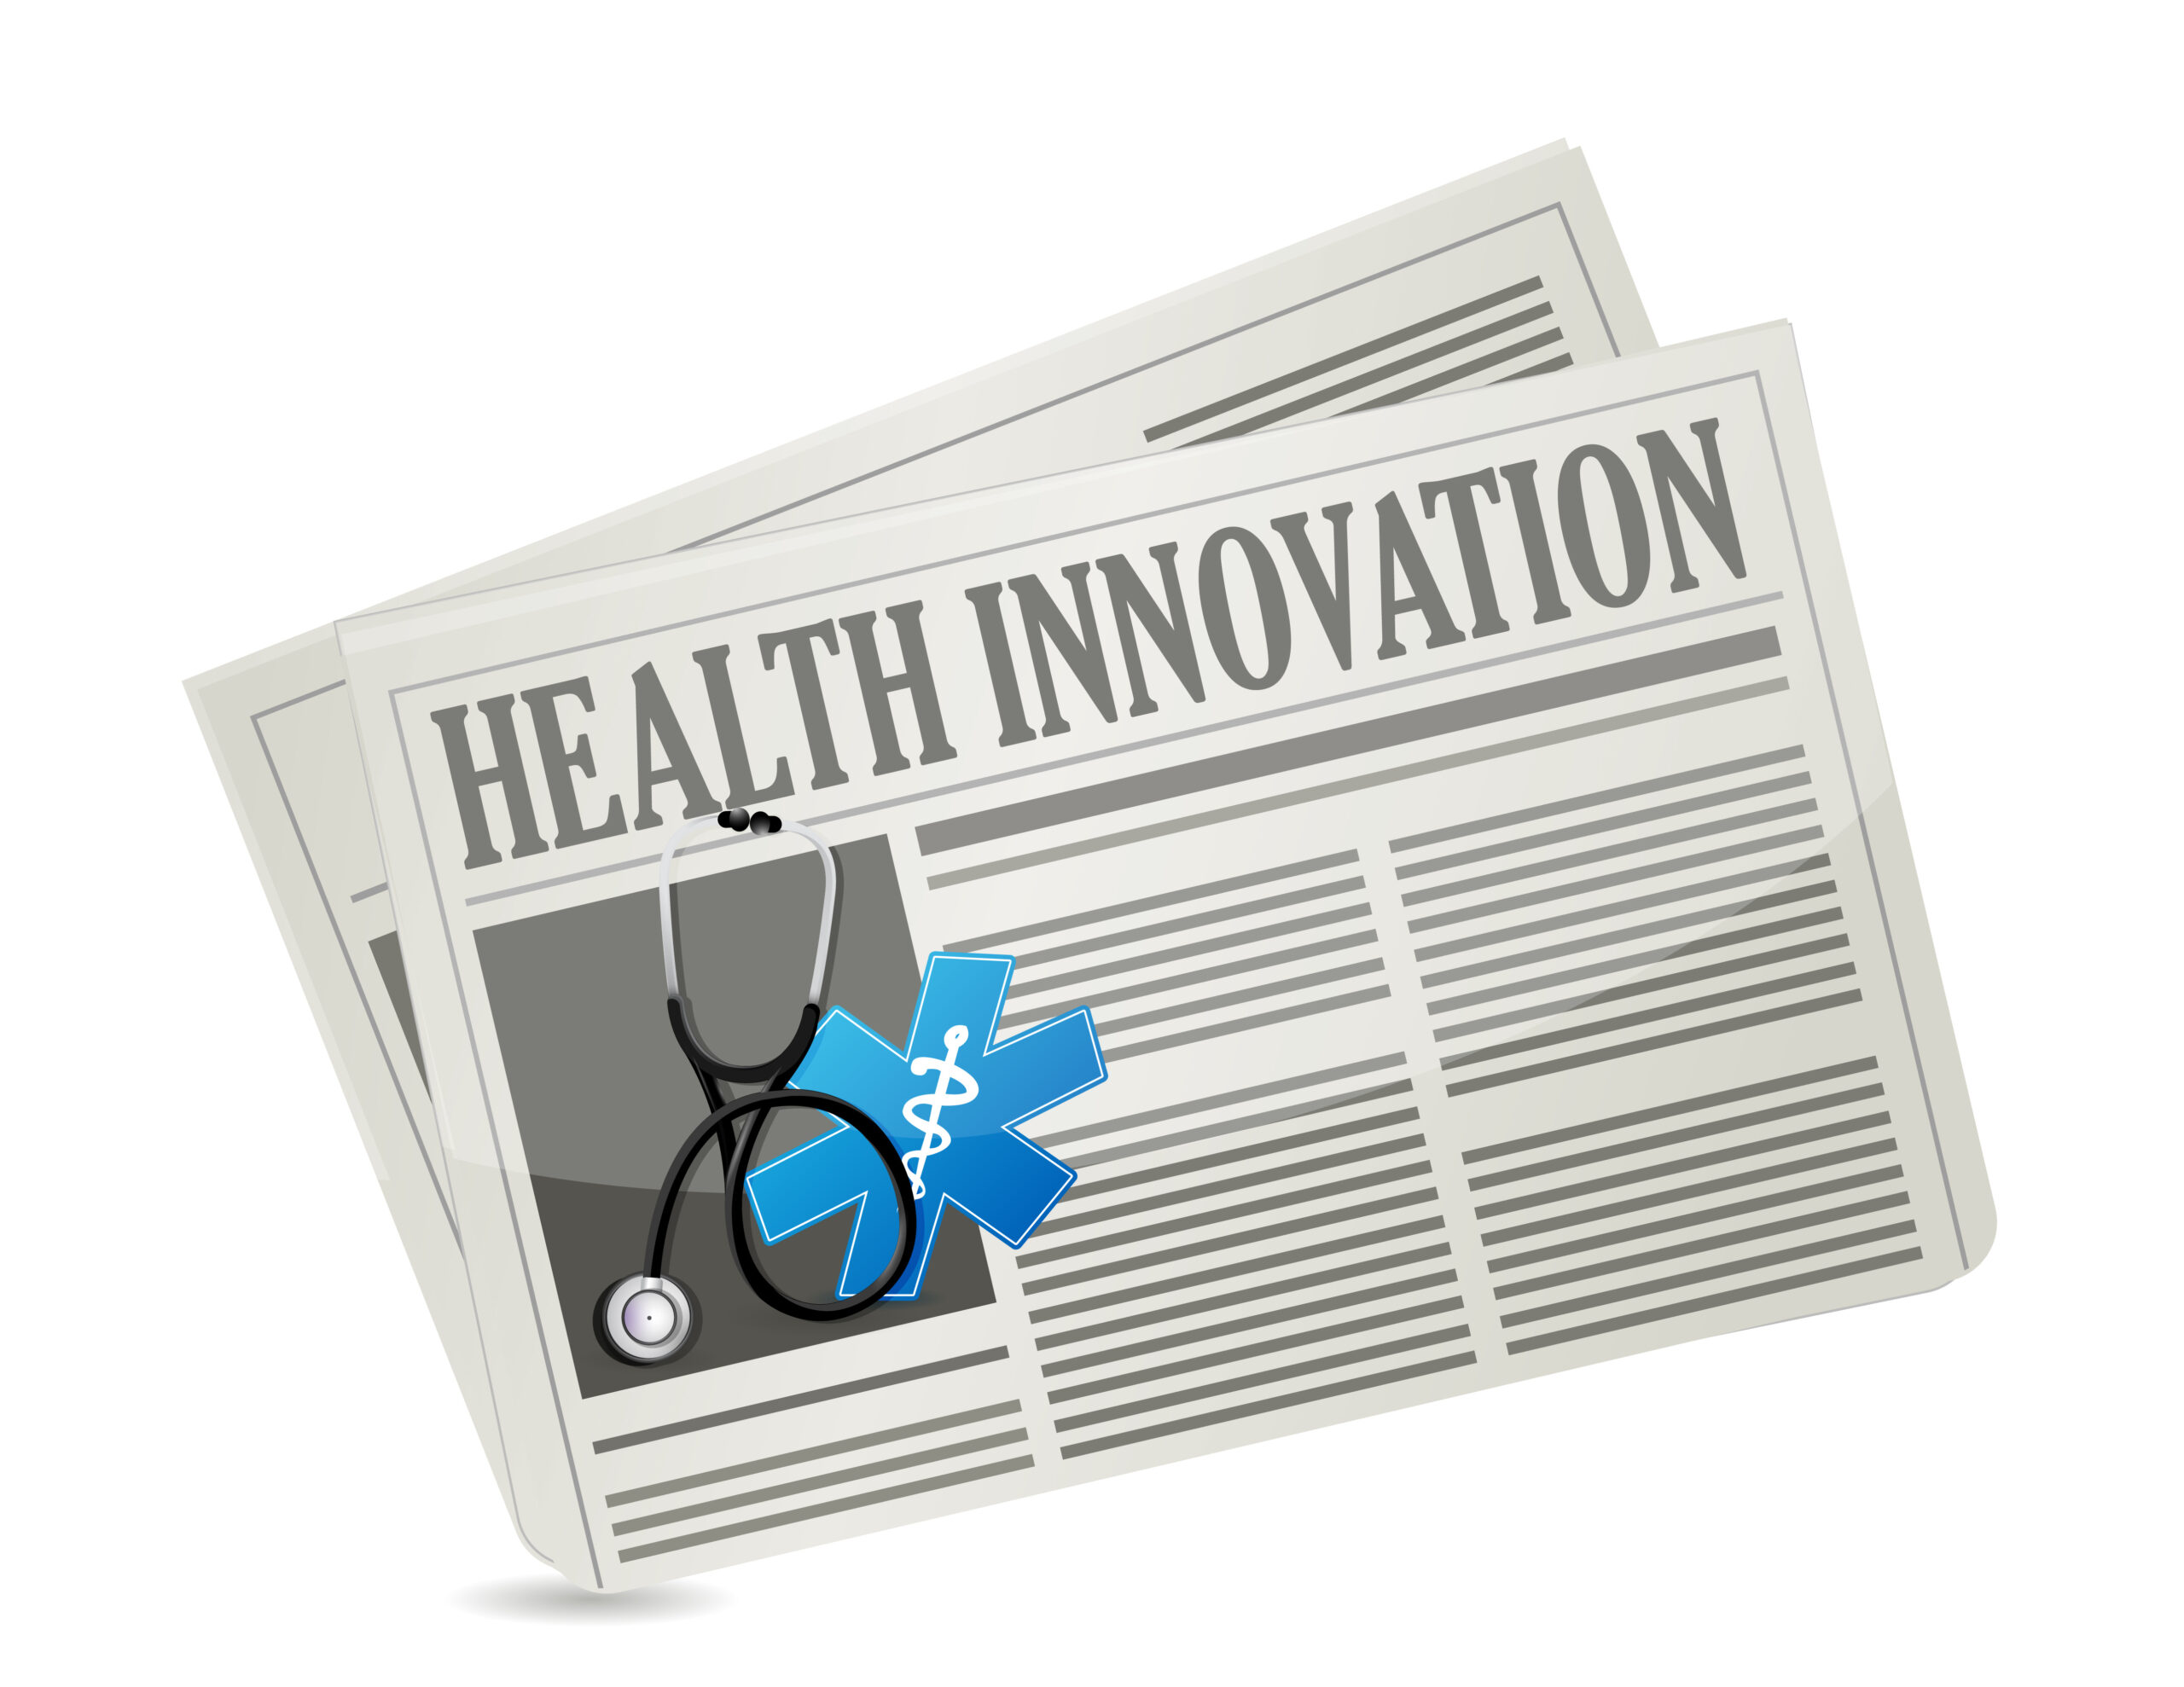 Cleveland Clinic’s Top 10 Medical Innovations For 2019